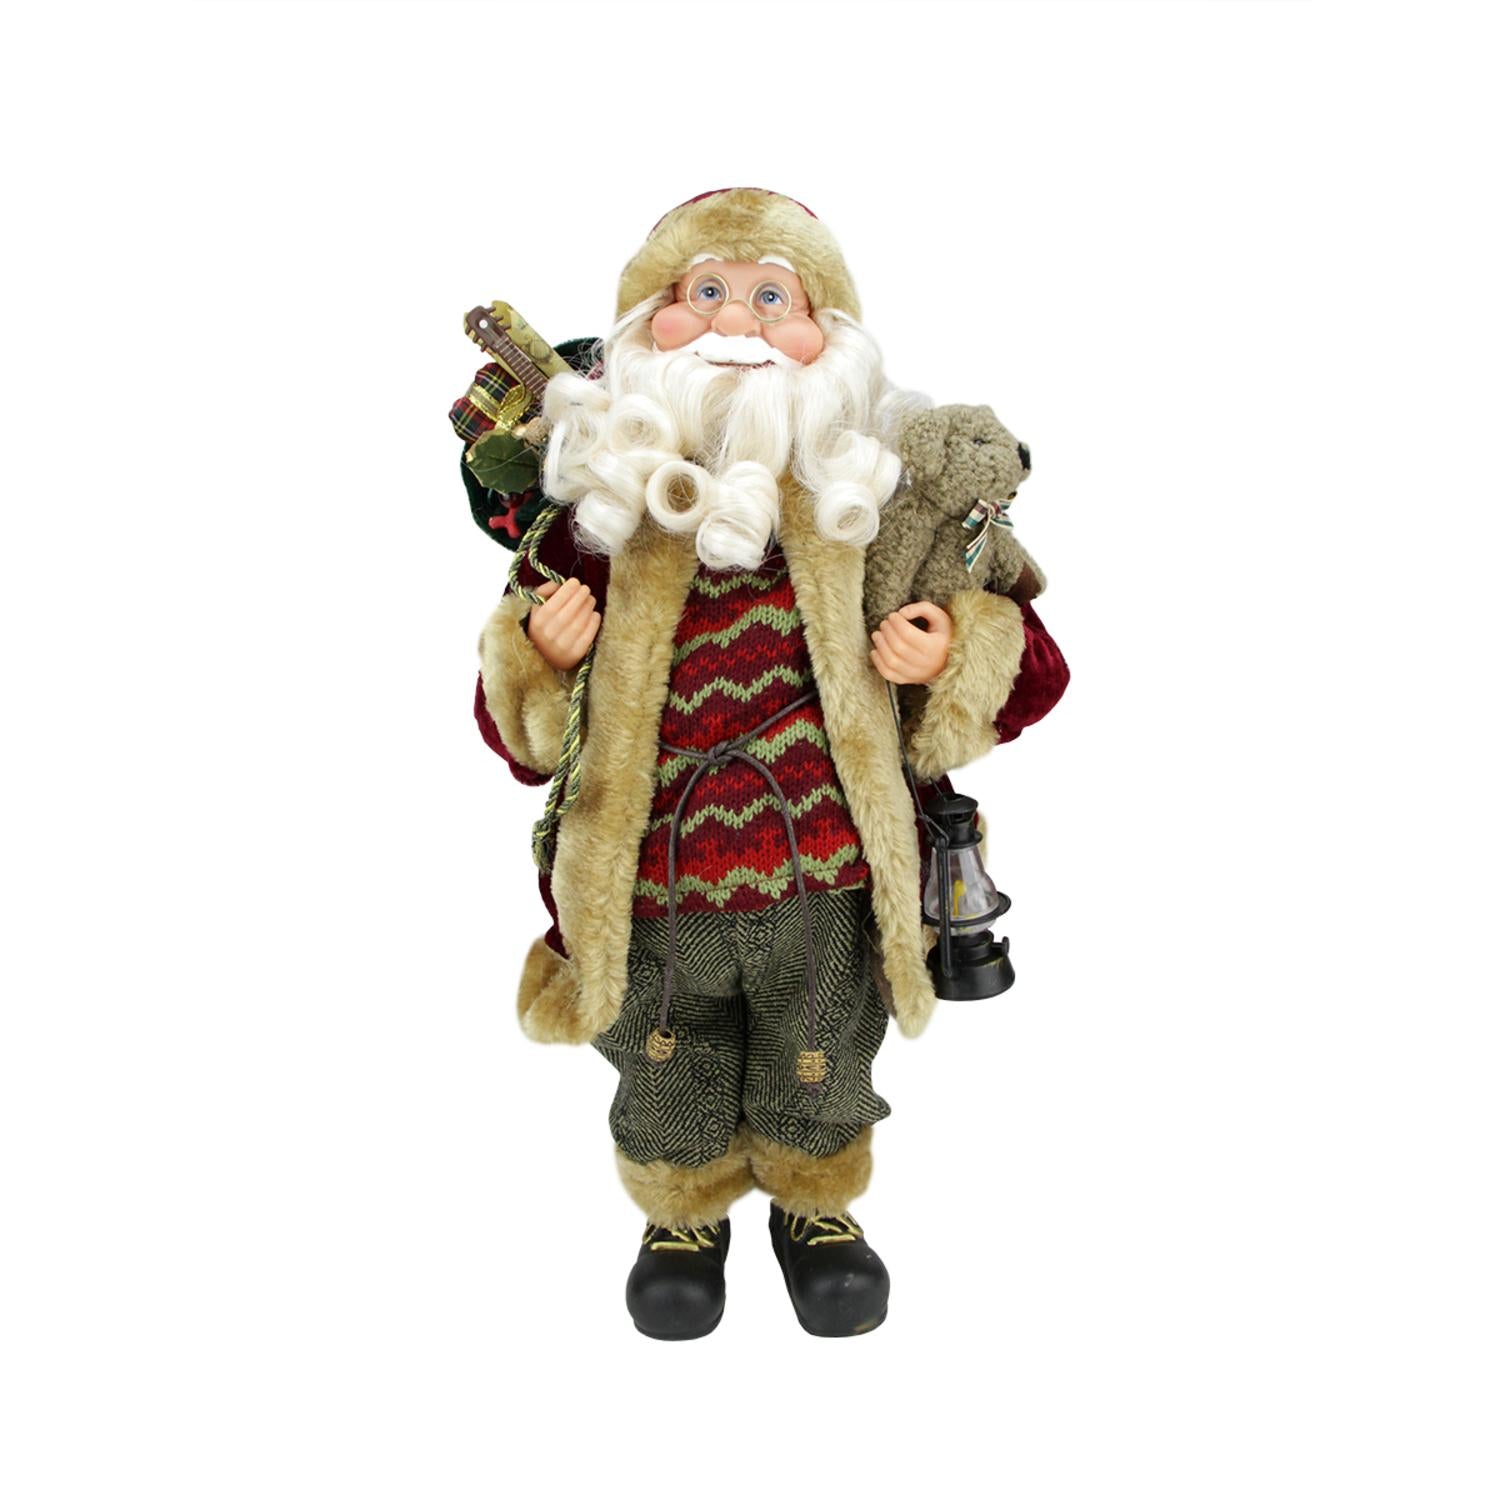 18" Woodland-Inspired Standing Santa Claus Christmas Figure with Teddy Bear and Lantern